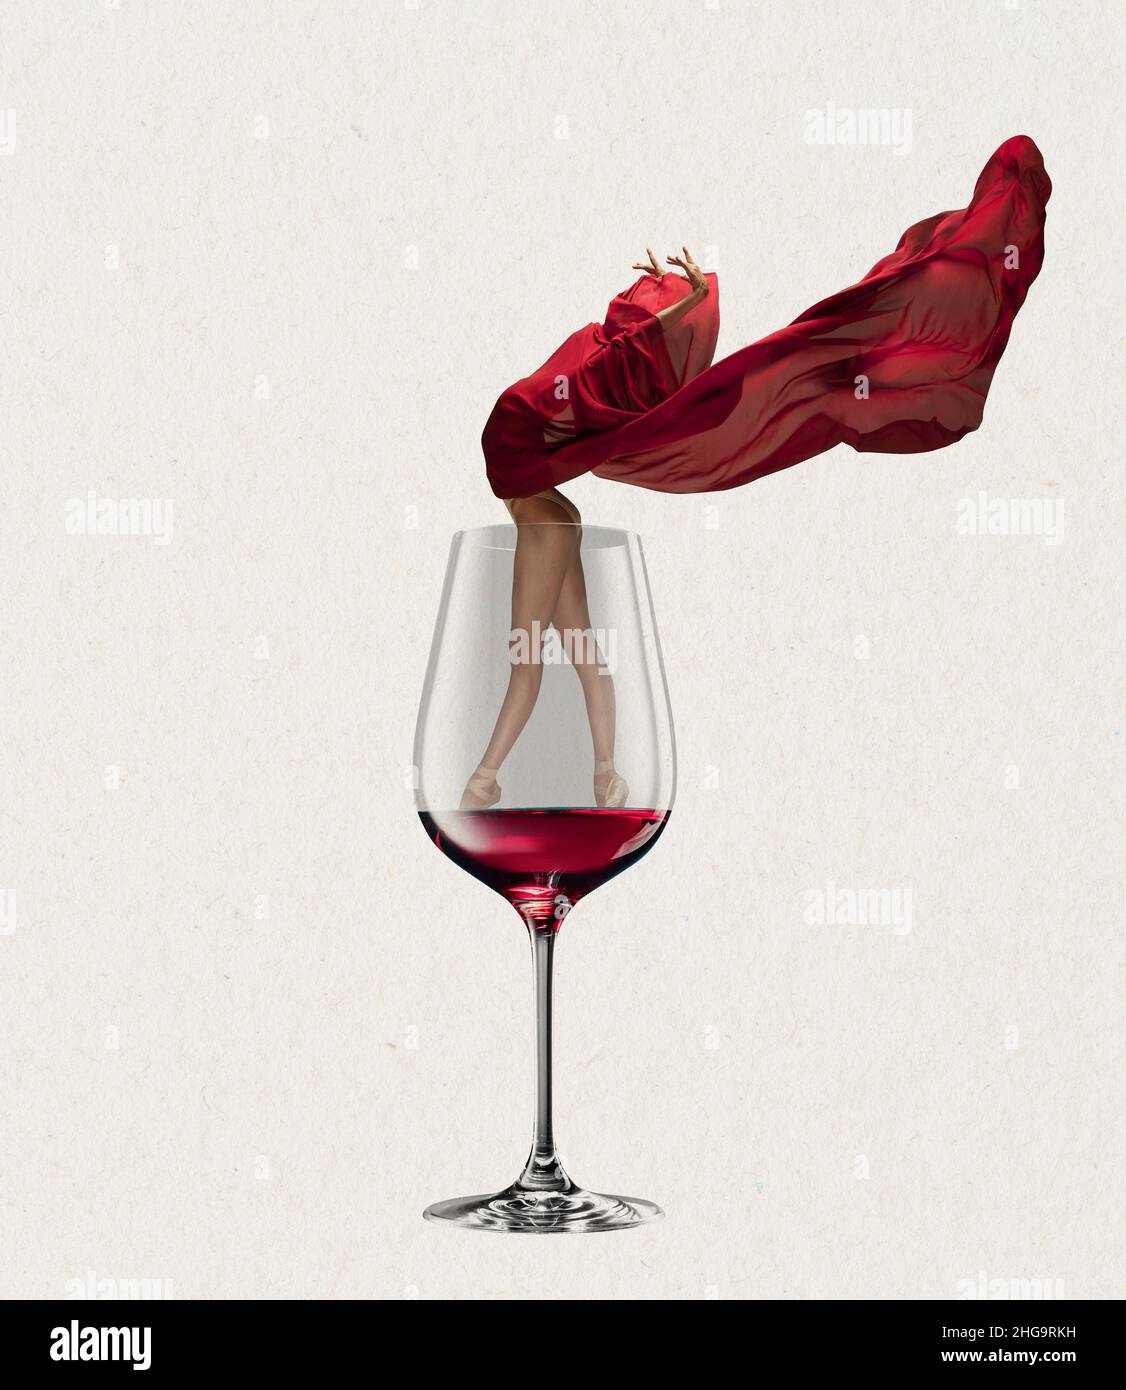 https://c8.alamy.com/comp/2HG9RKH/contemporary-art-collage-modern-design-party-mood-young-slim-girl-into-red-wine-glass-isolated-on-white-background-surrealism-2HG9RKH.jpg